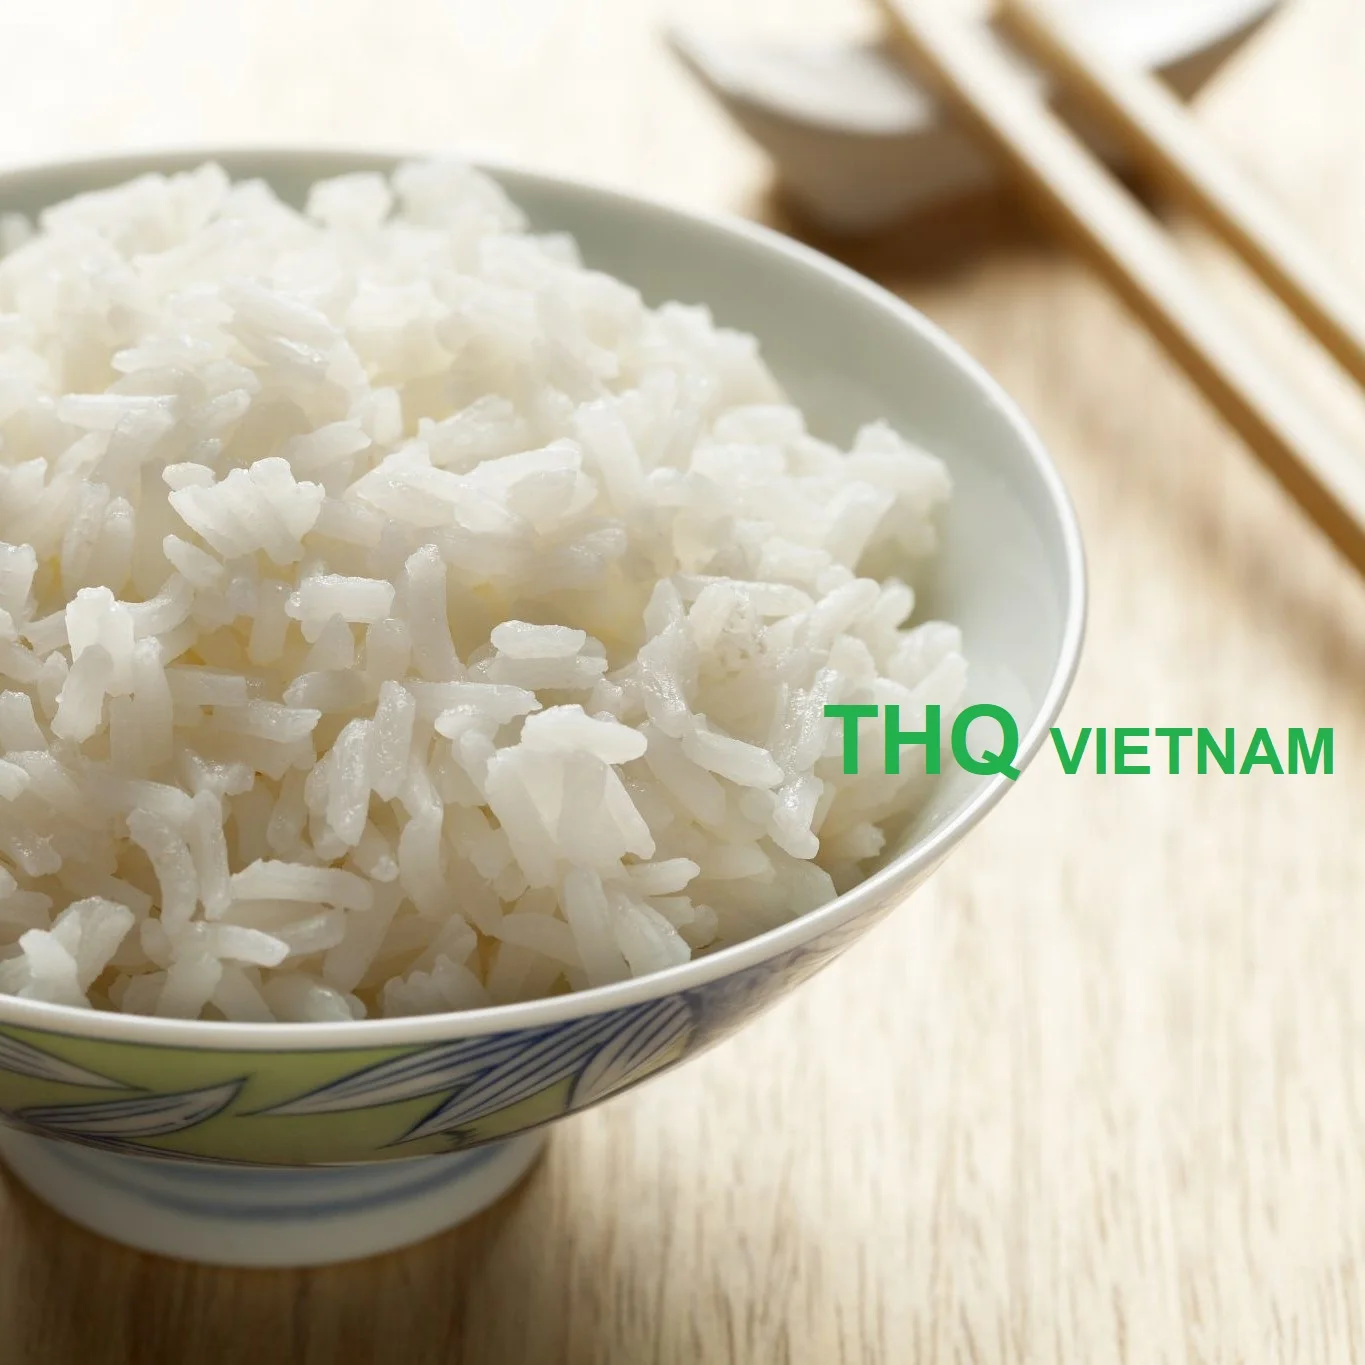 
[THQ VIETNAM] THE BEST JASMINE RICE - LONG GRAIN WHITE RICE/ ST24 WITH CHEAP PRICE (Ms. Rose: +84 977 610 525) 